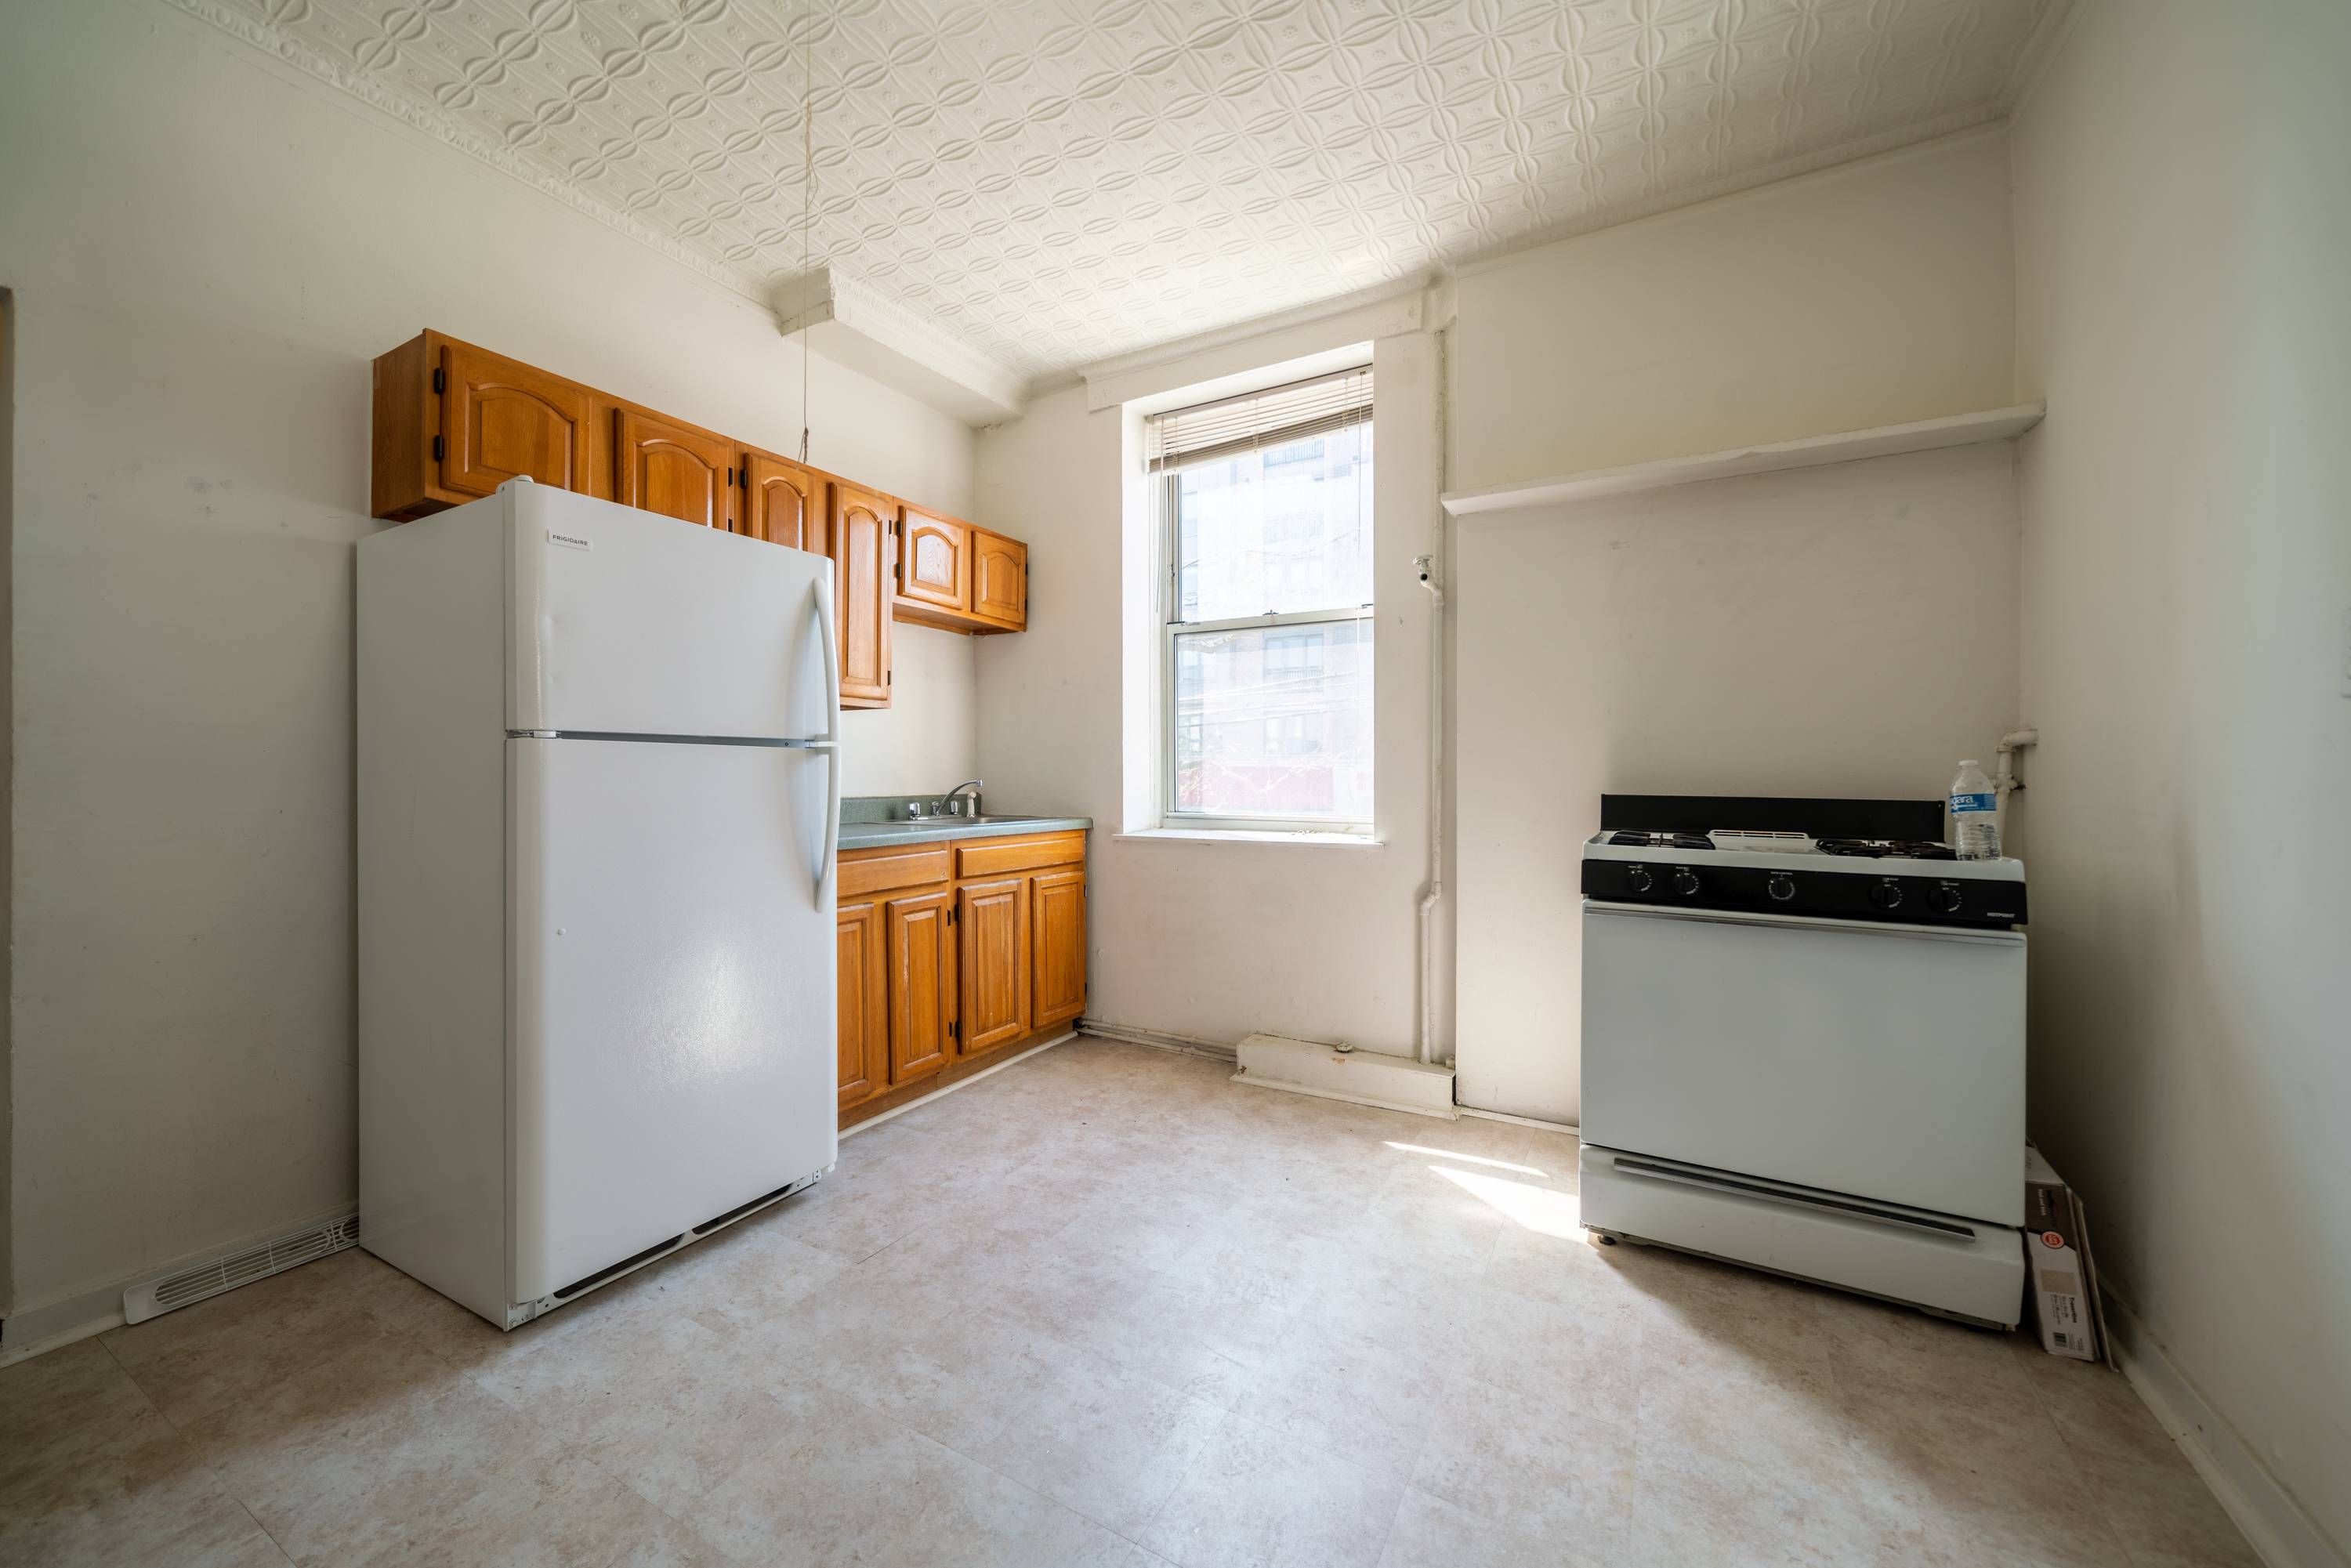 2BR 1BA with Walk in Closet located in Uptown Hoboken, Trader Joes across the Street!  Seconds to Bus Line and Ferry to NYC!